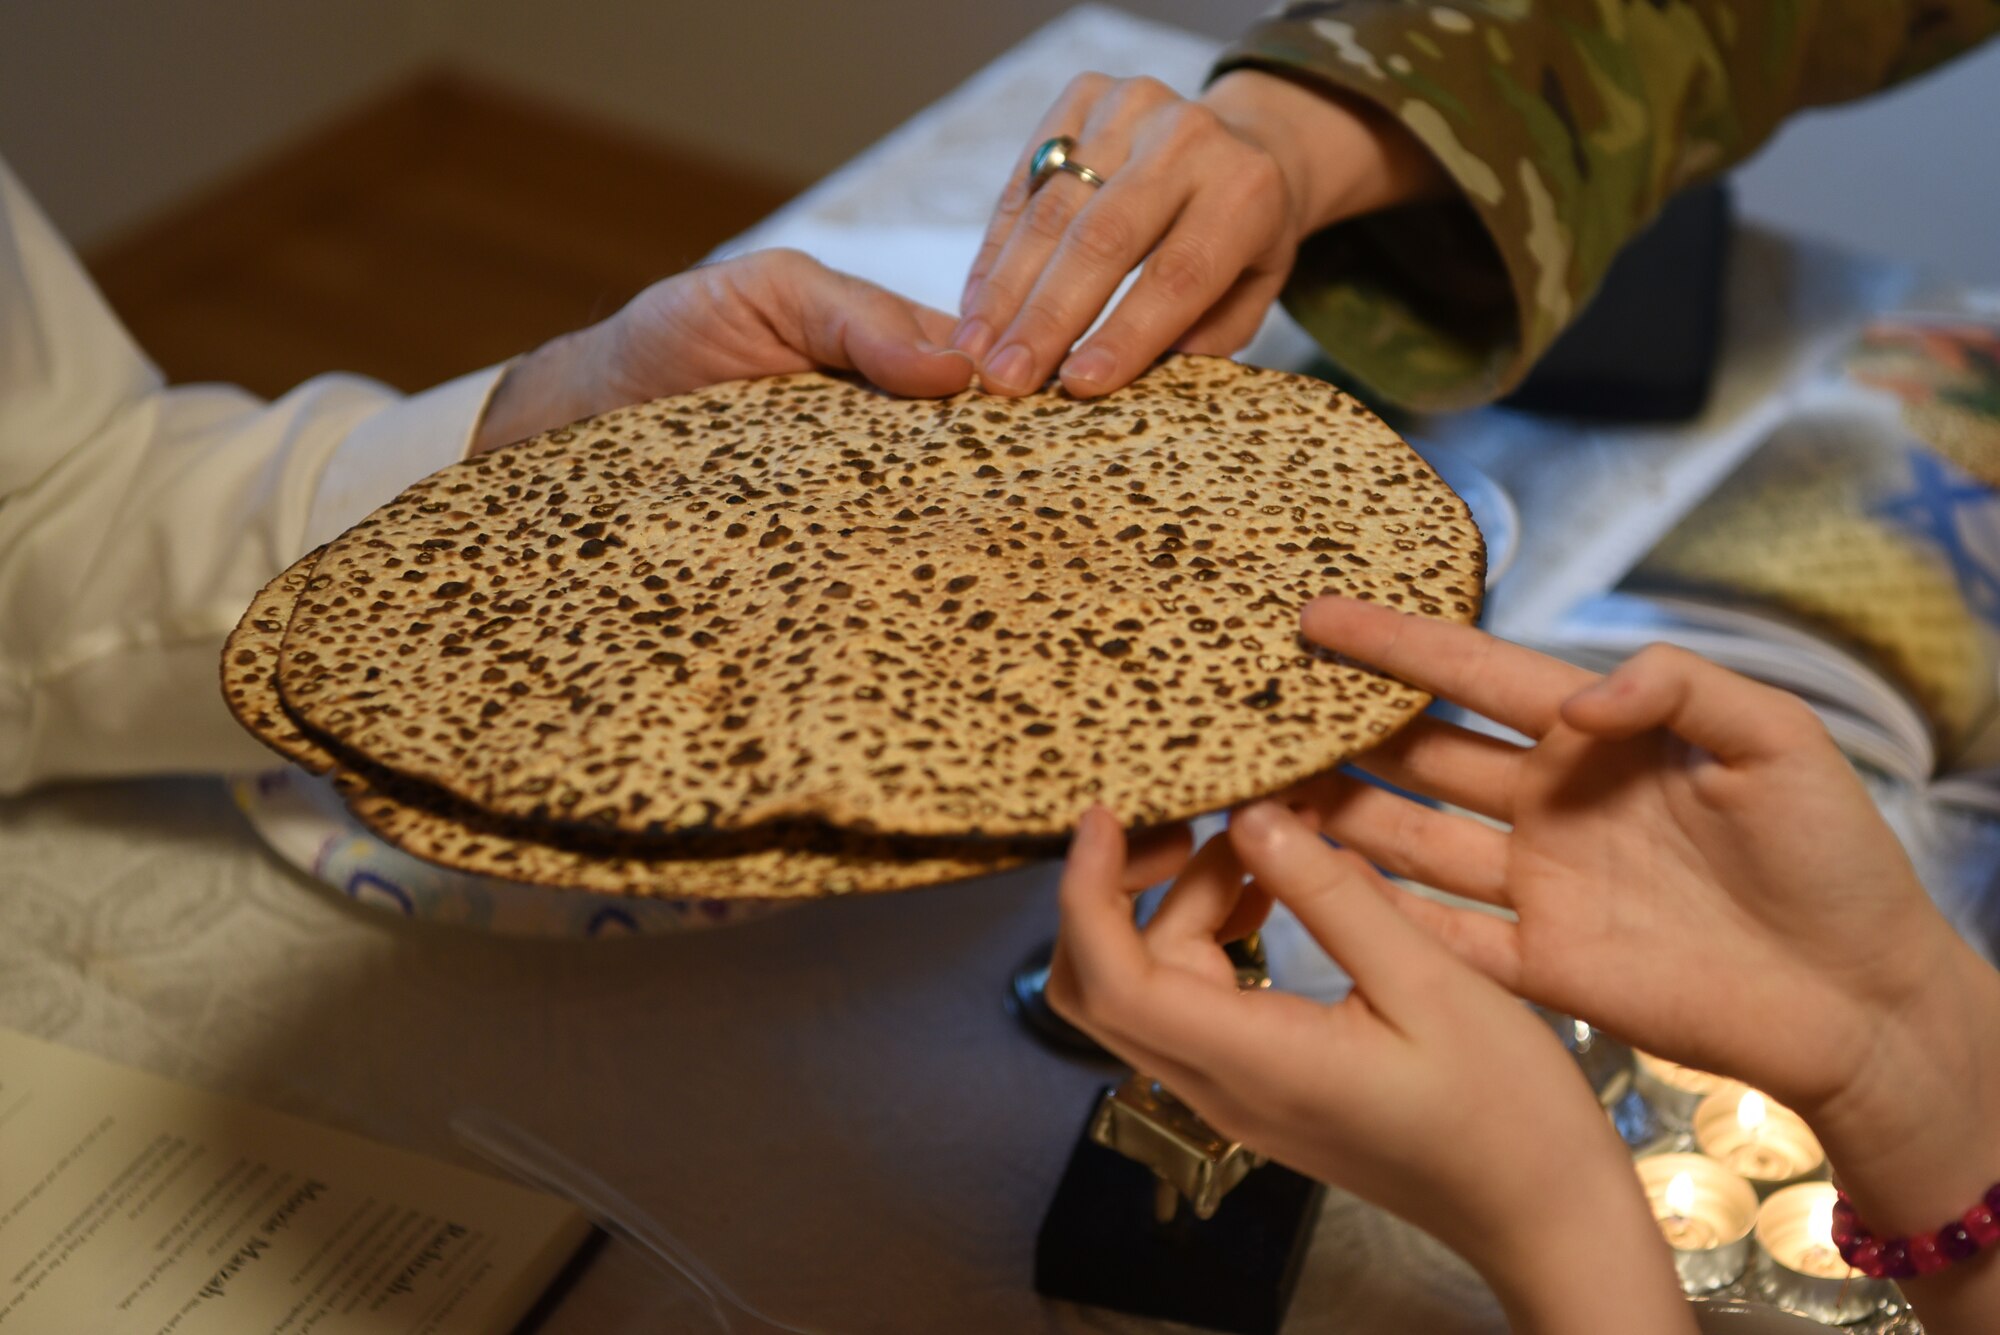 U.S. Air Force Maj. Sarah Schechter, 86th Airlift Wing staff chaplain, and her family lead a virtual Passover Seder from their home in Kaiserslautern, Germany, April 8, 2020.